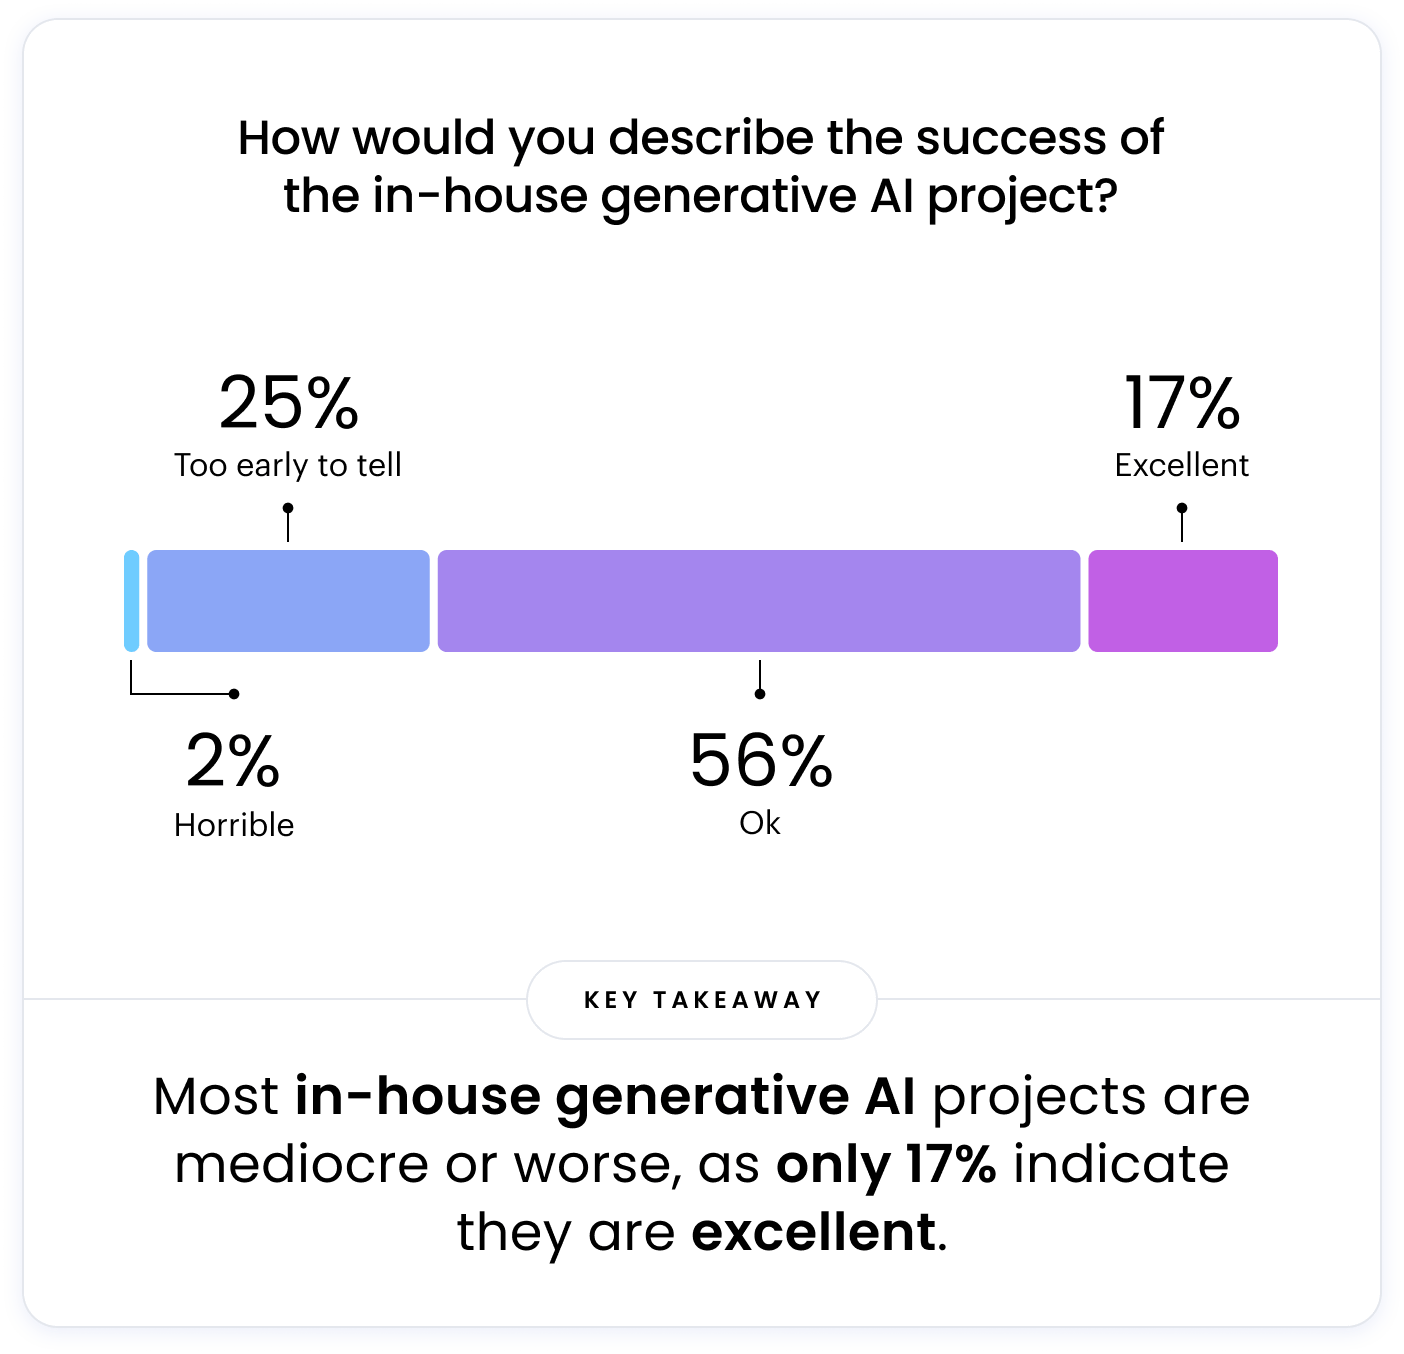 This bar chart is divided into four categories: Excellent, OK, Horrible, and Too early to tell. The percentage for each category is shown next to it. The key takeaway from the chart is that most in-house generative AI projects are mediocre or worse, as only 17% indicate they are excellent.